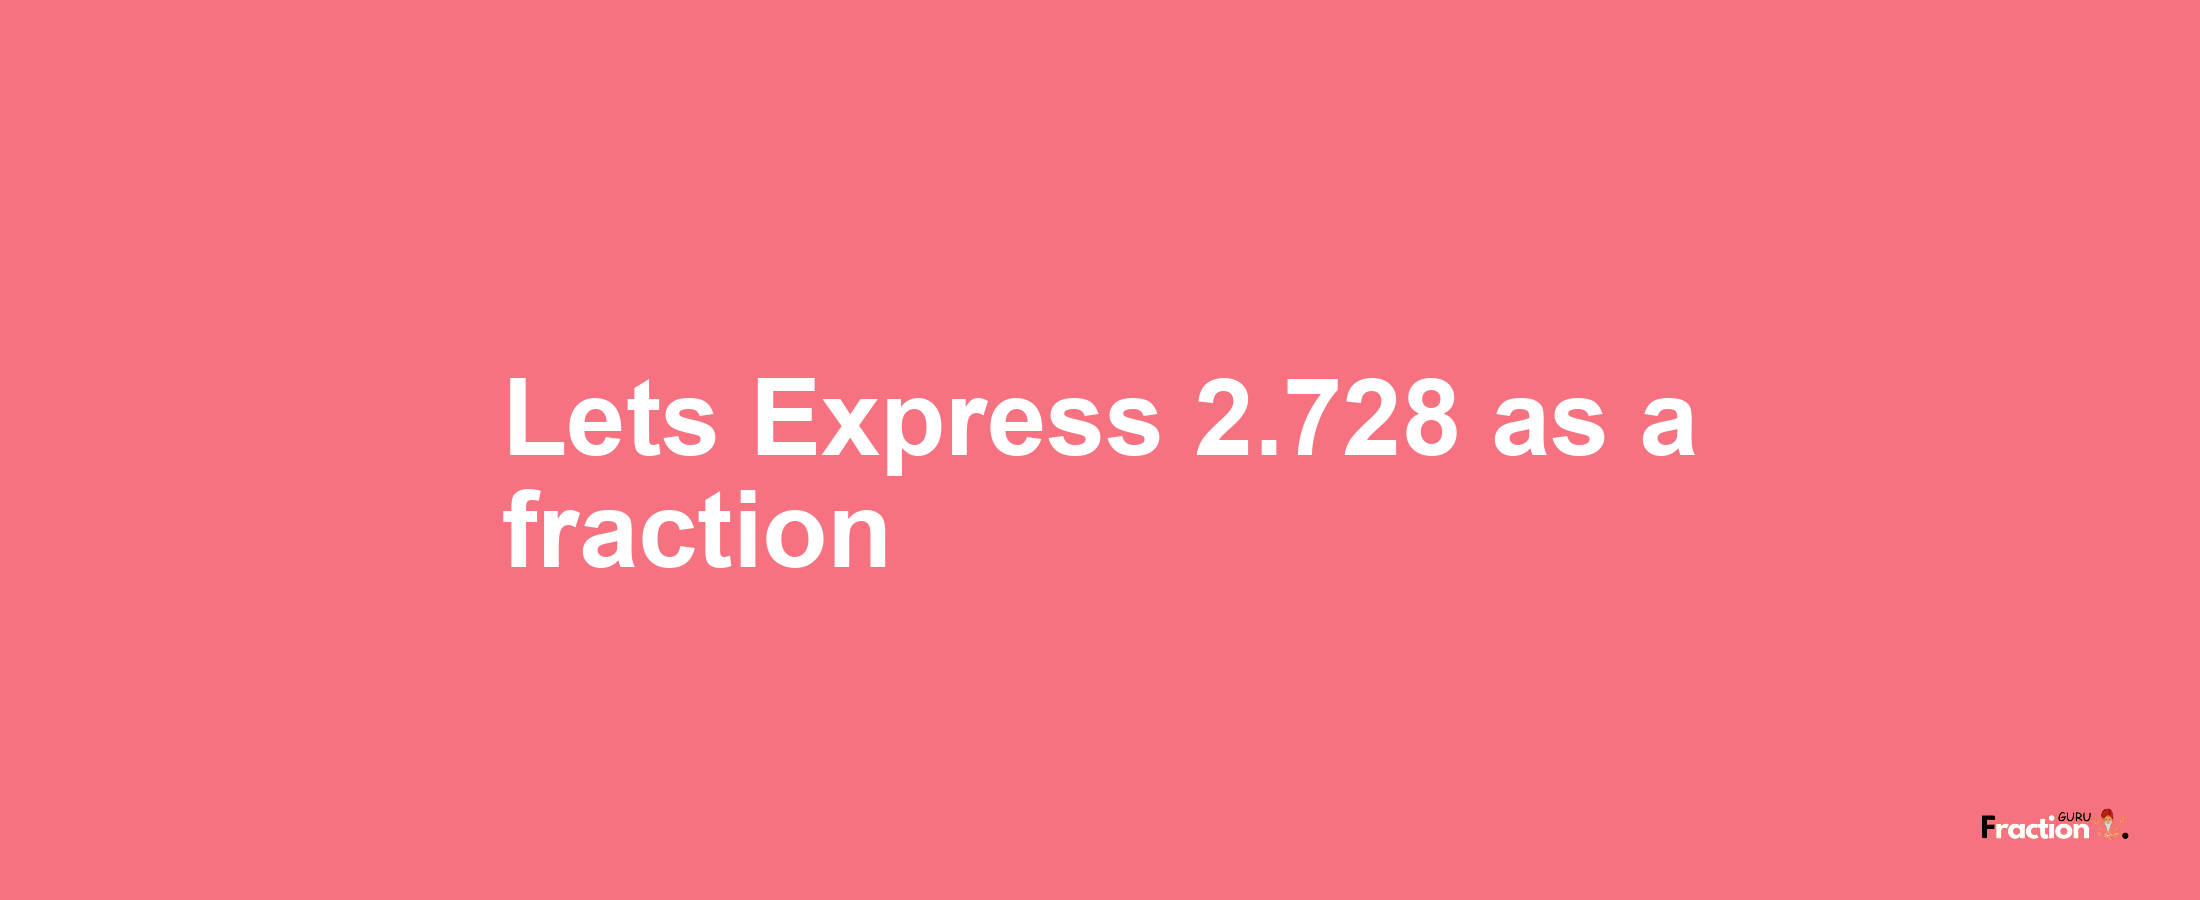 Lets Express 2.728 as afraction